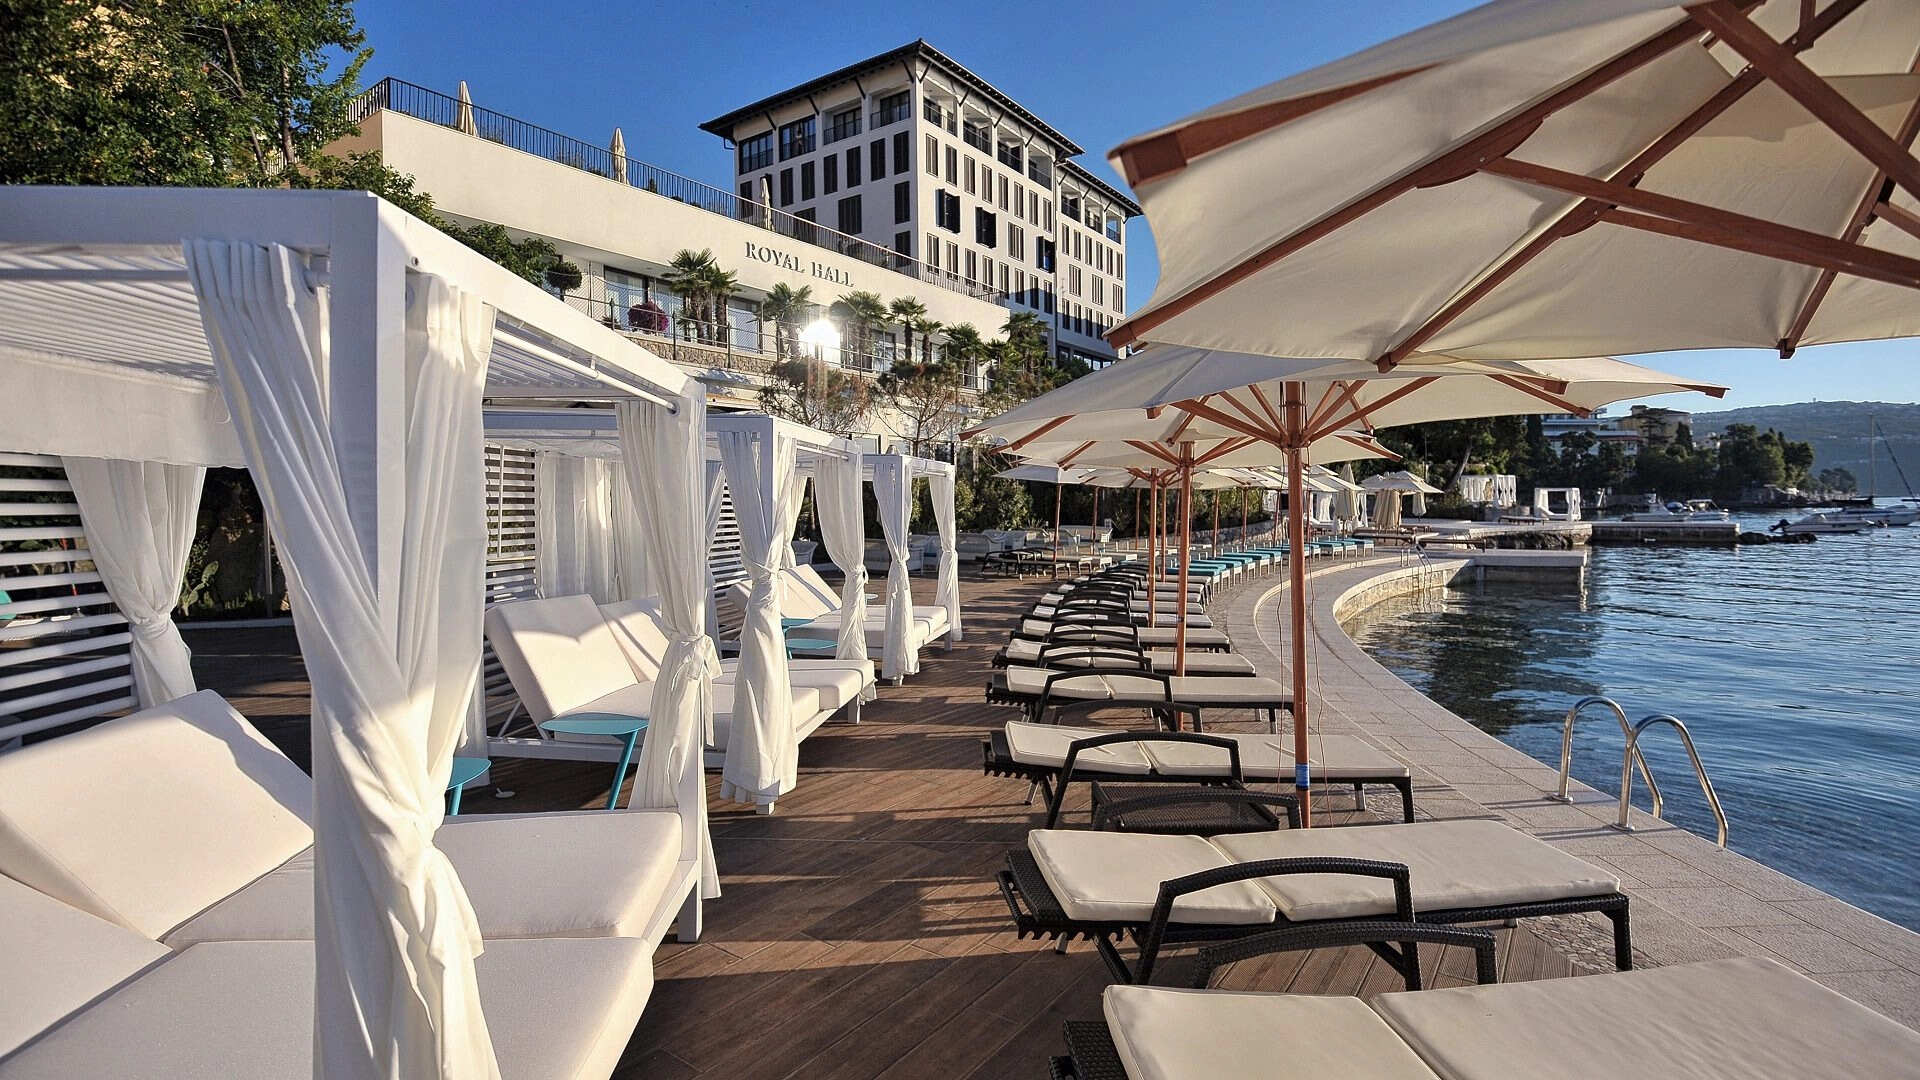 Sunbeds and parasols on a stylish Adriatic beach lounge overlooking Kvarner Bay